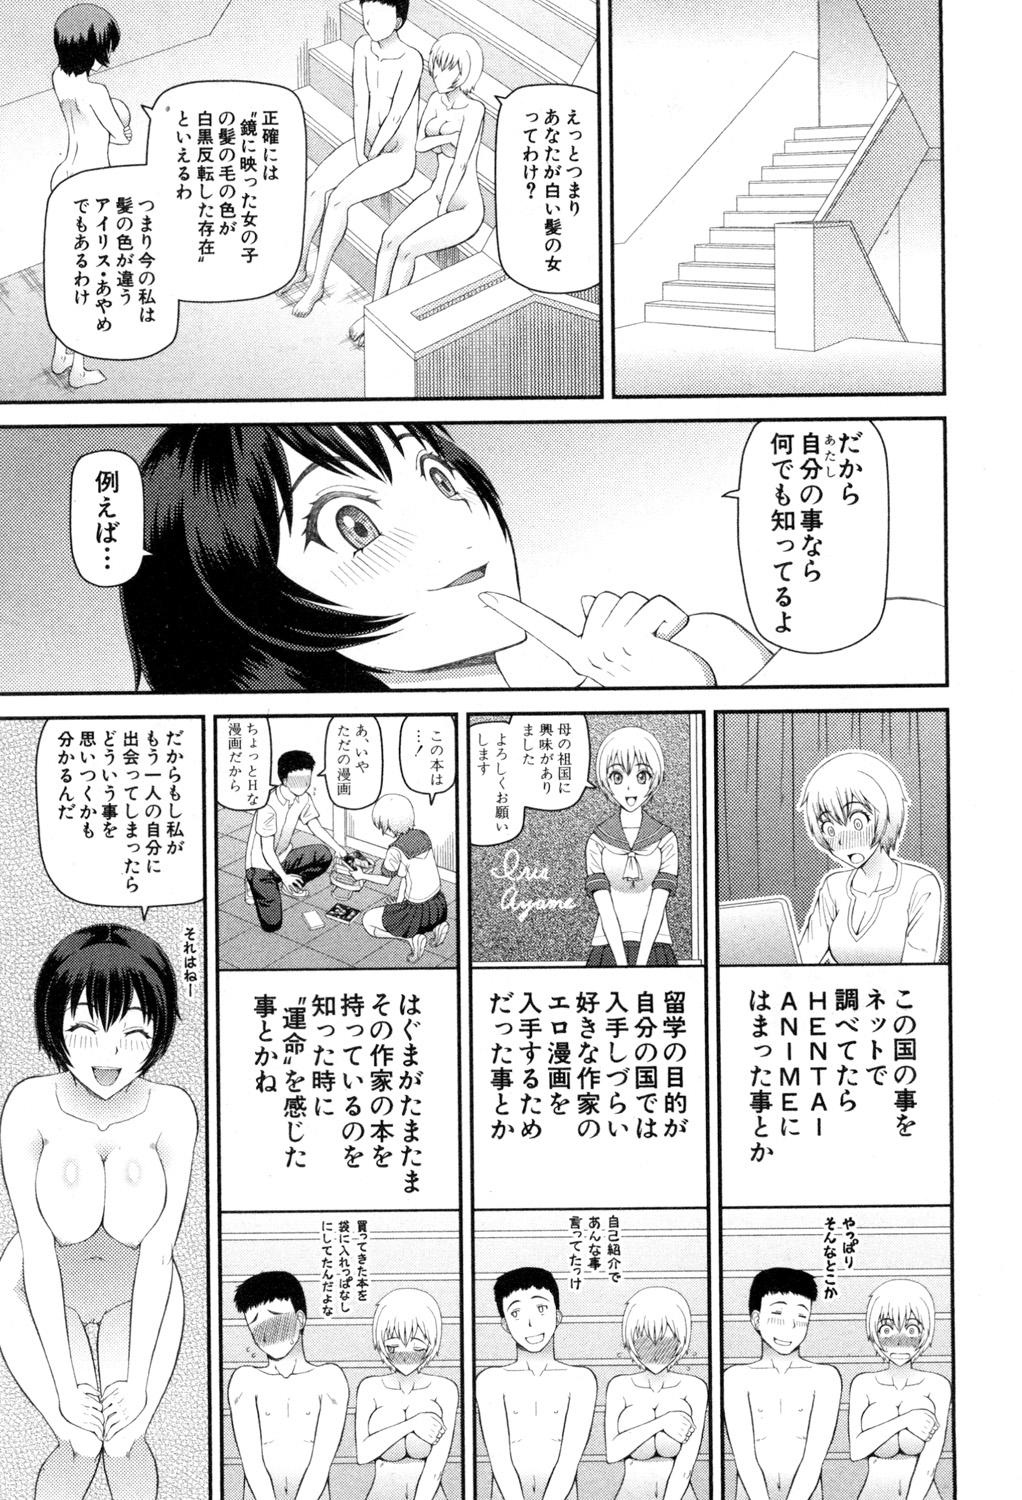 BUSTER COMIC 2015-07 168